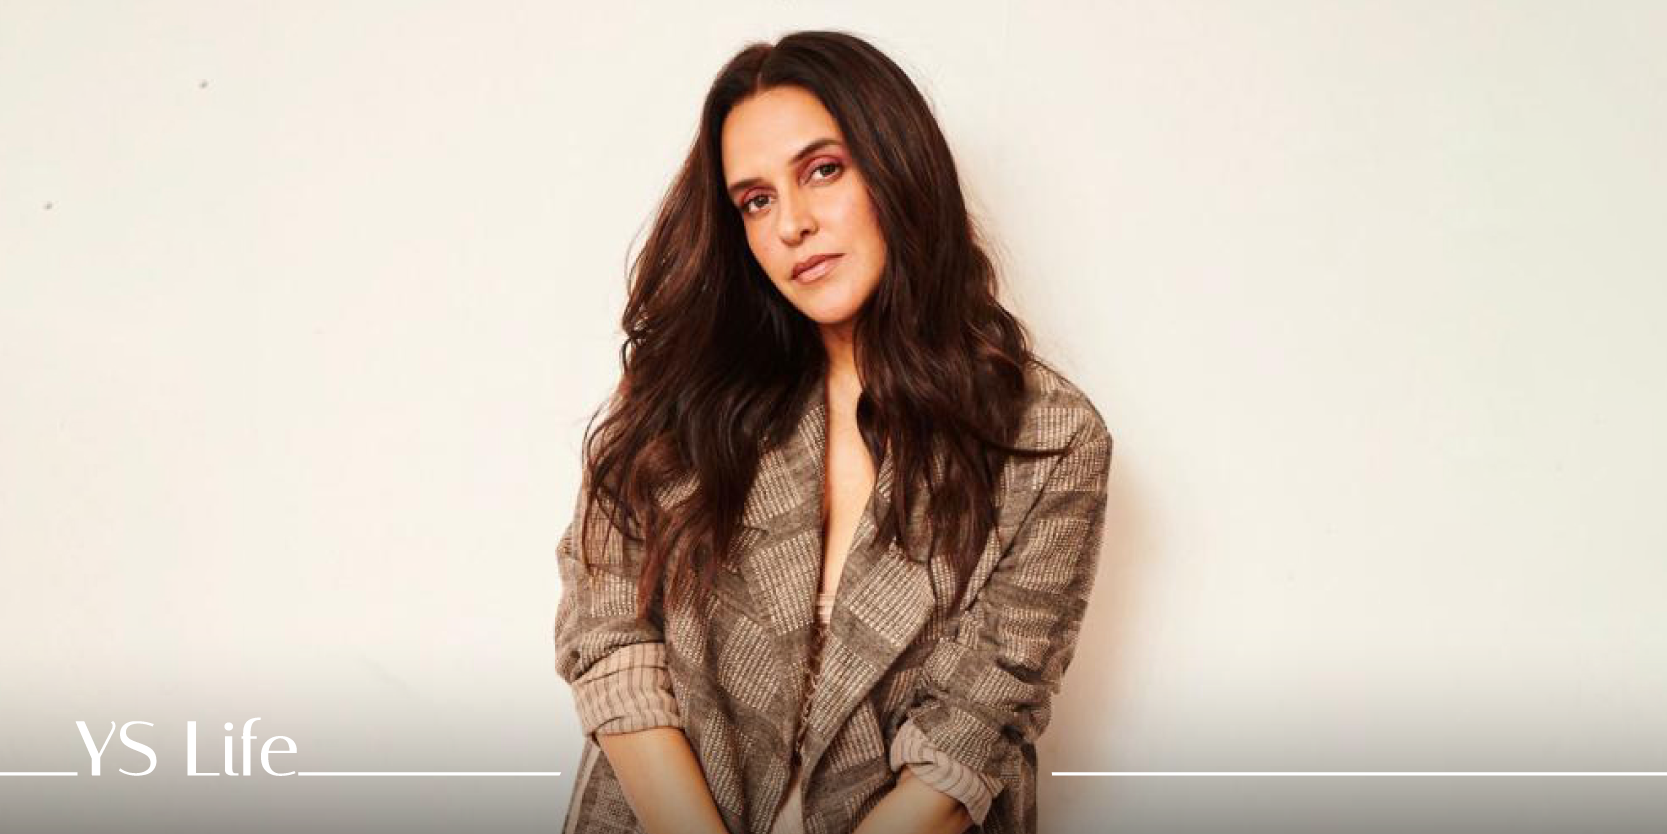 Actor Neha Dhupia gets candid about parenting, acting, and entrepreneurial ambitions